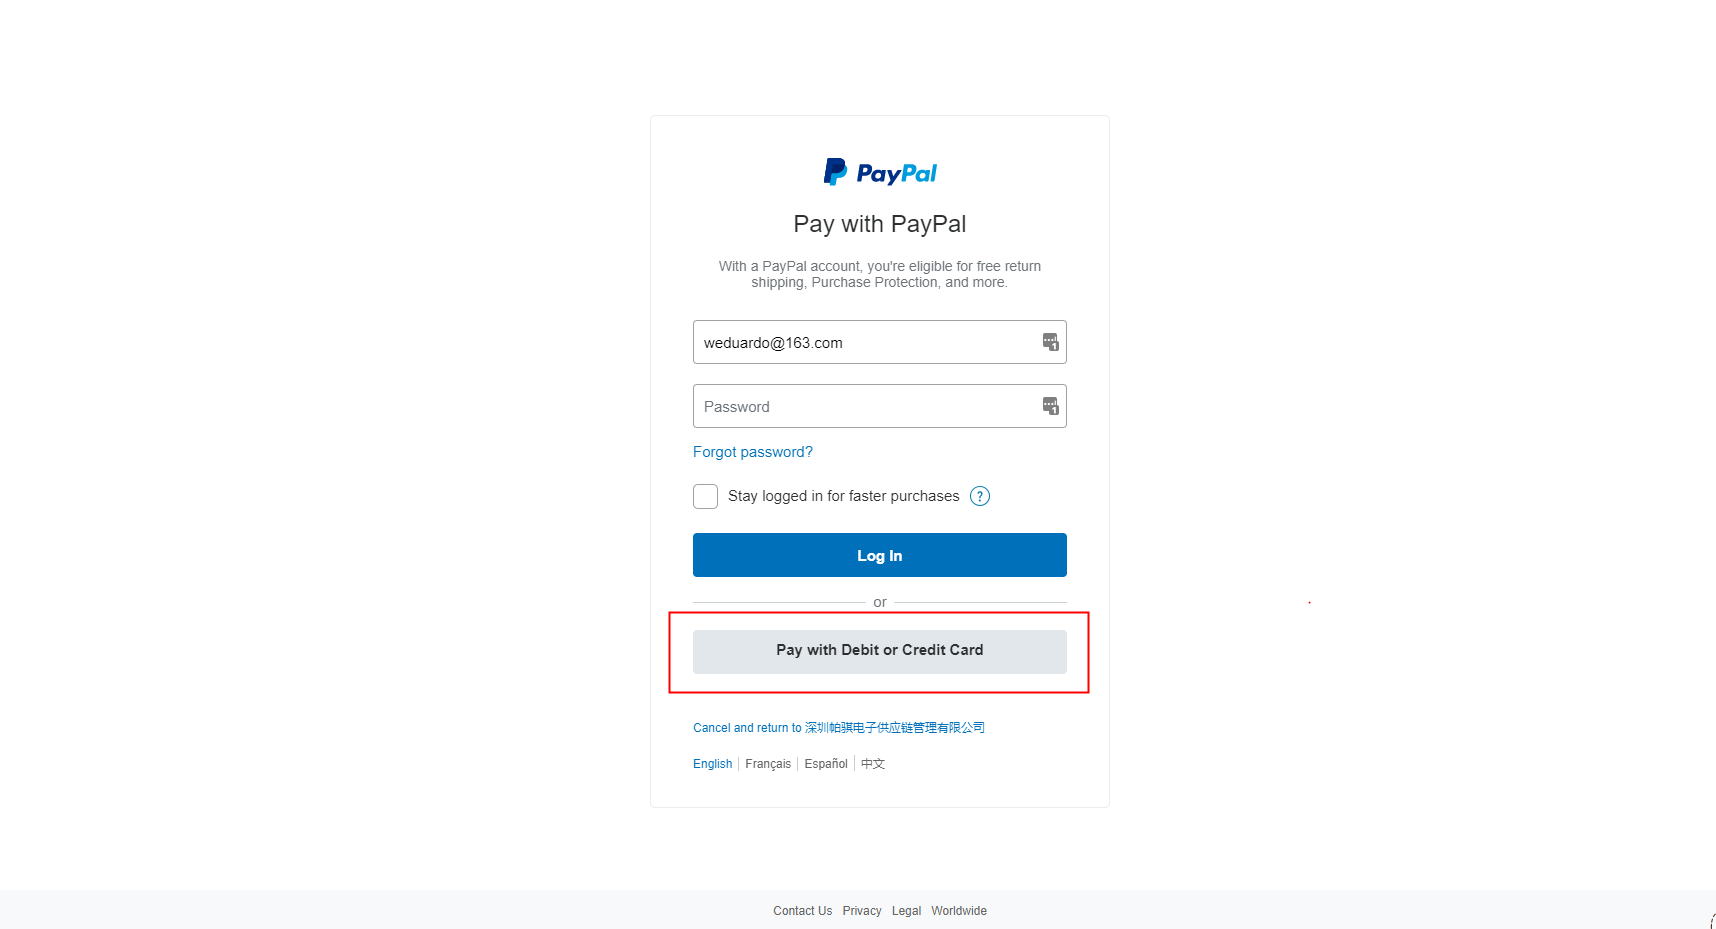 How to make a payment without a Paypal account?